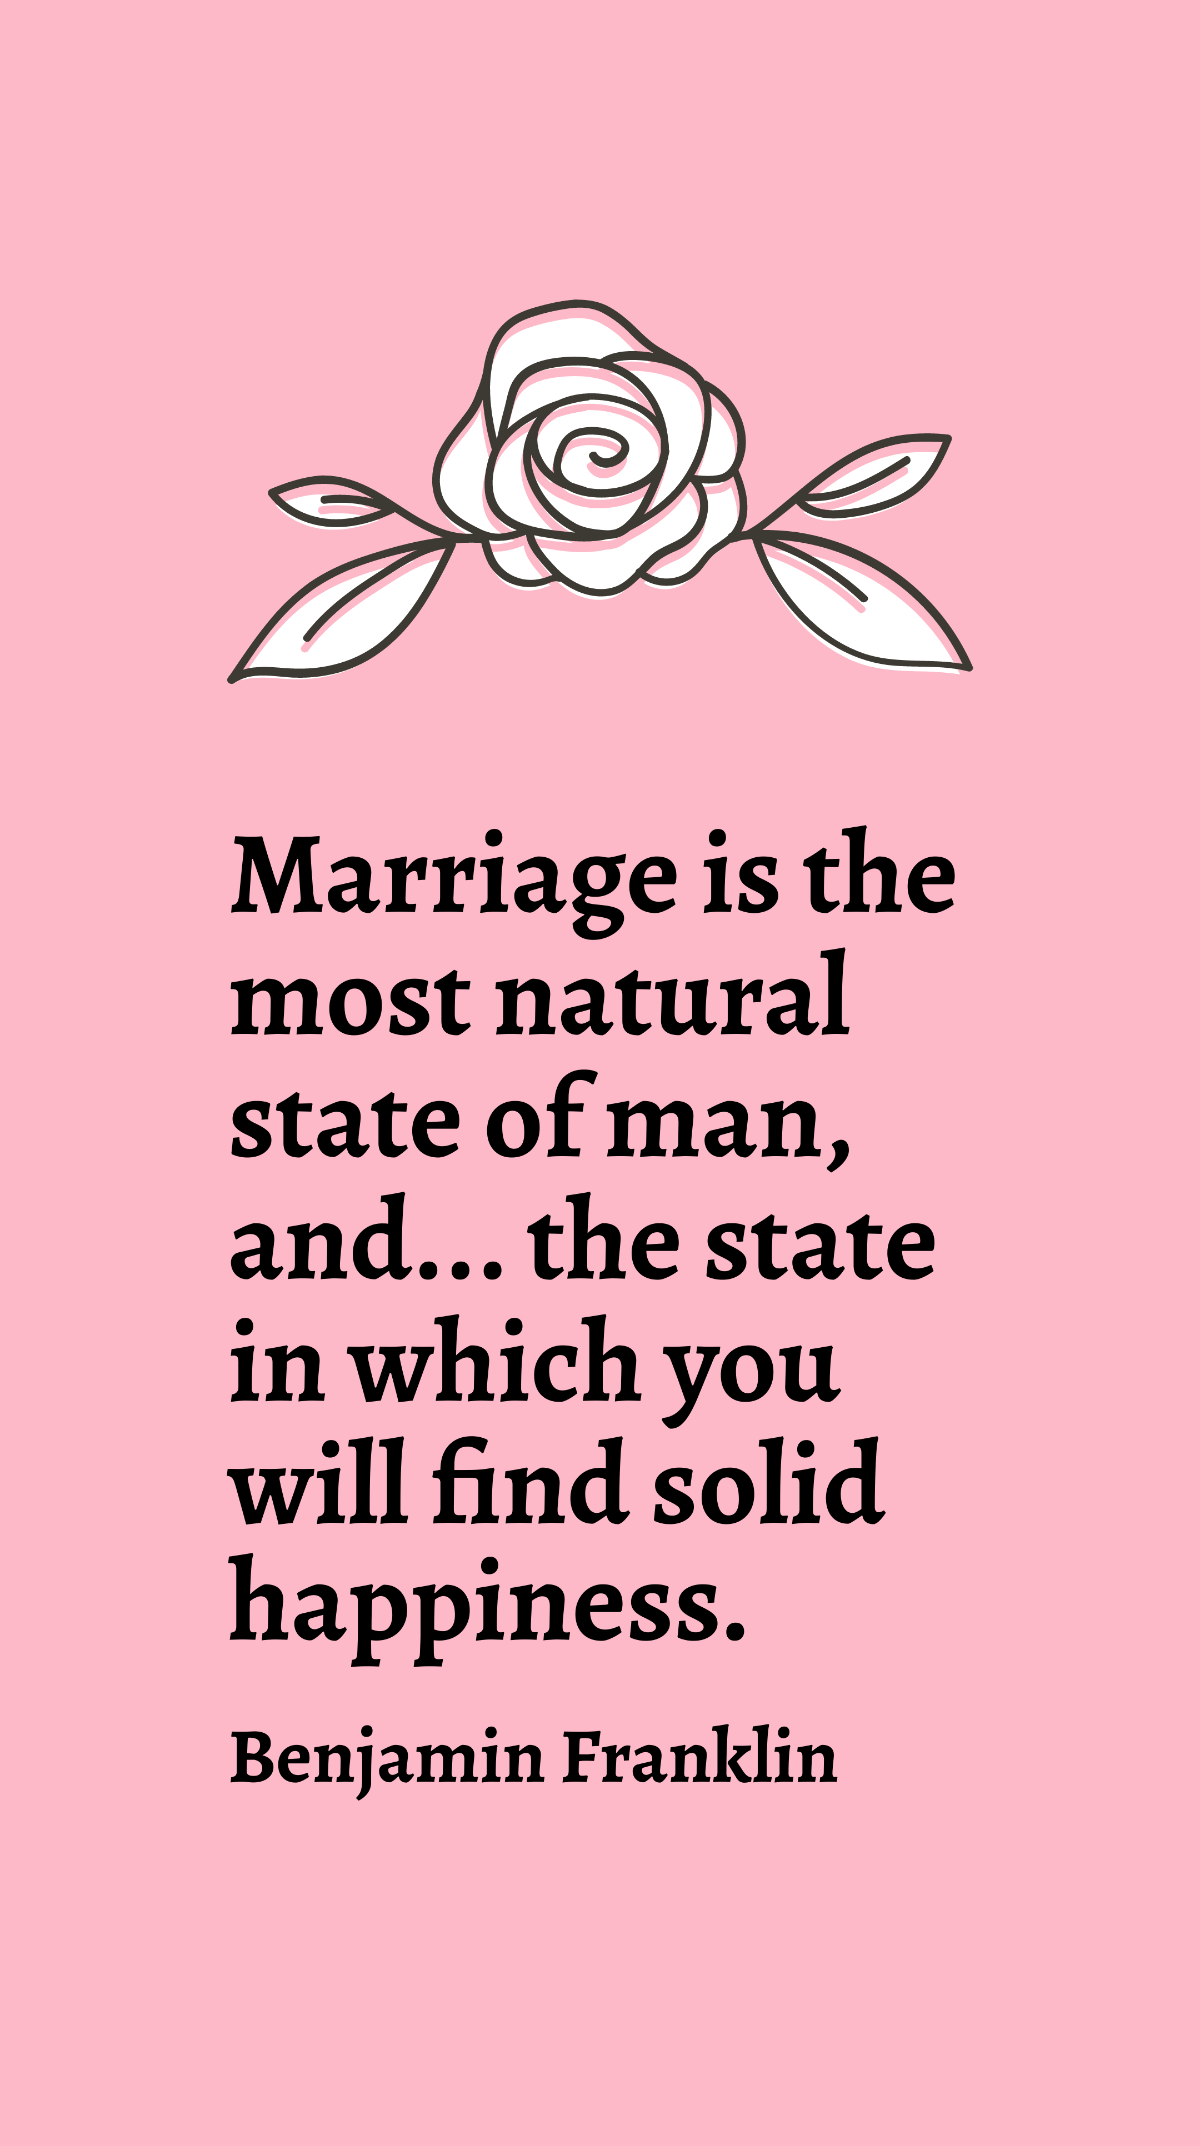 Benjamin Franklin - Marriage is the most natural state of man, and... the state in which you will find solid happiness.